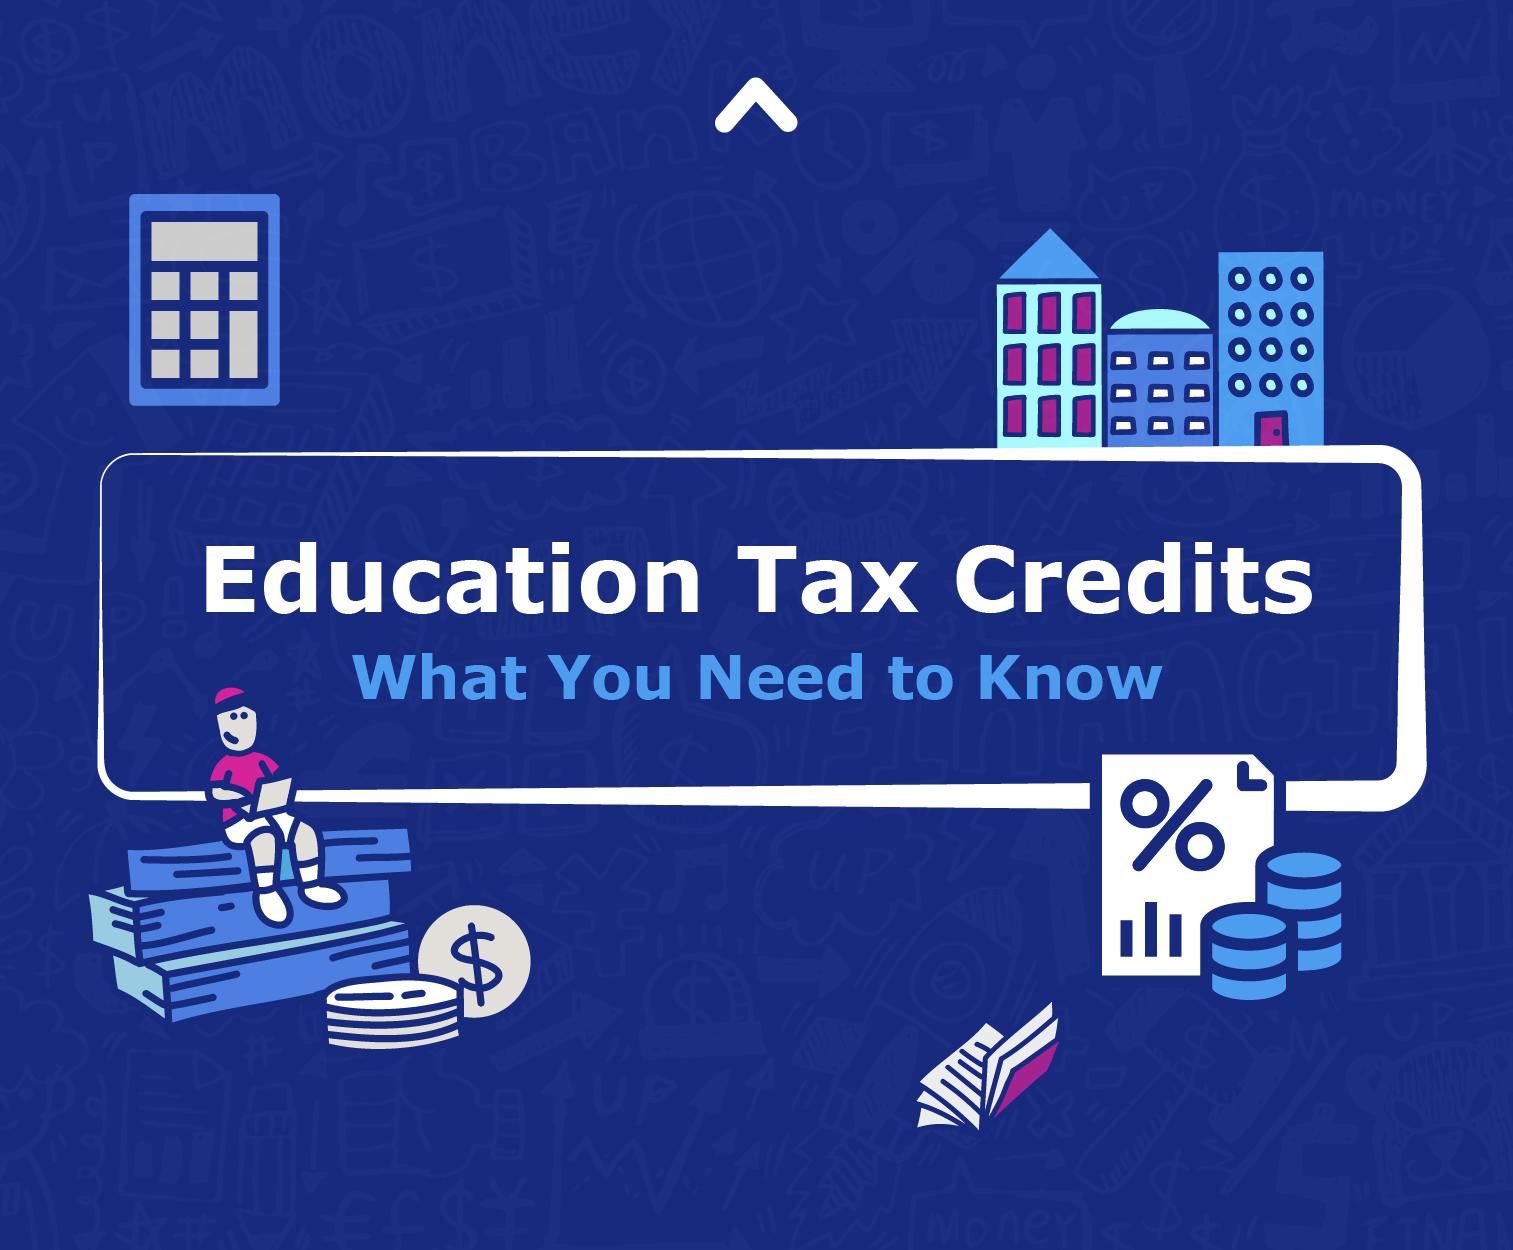 Education Tax Credits: What You Need to Know